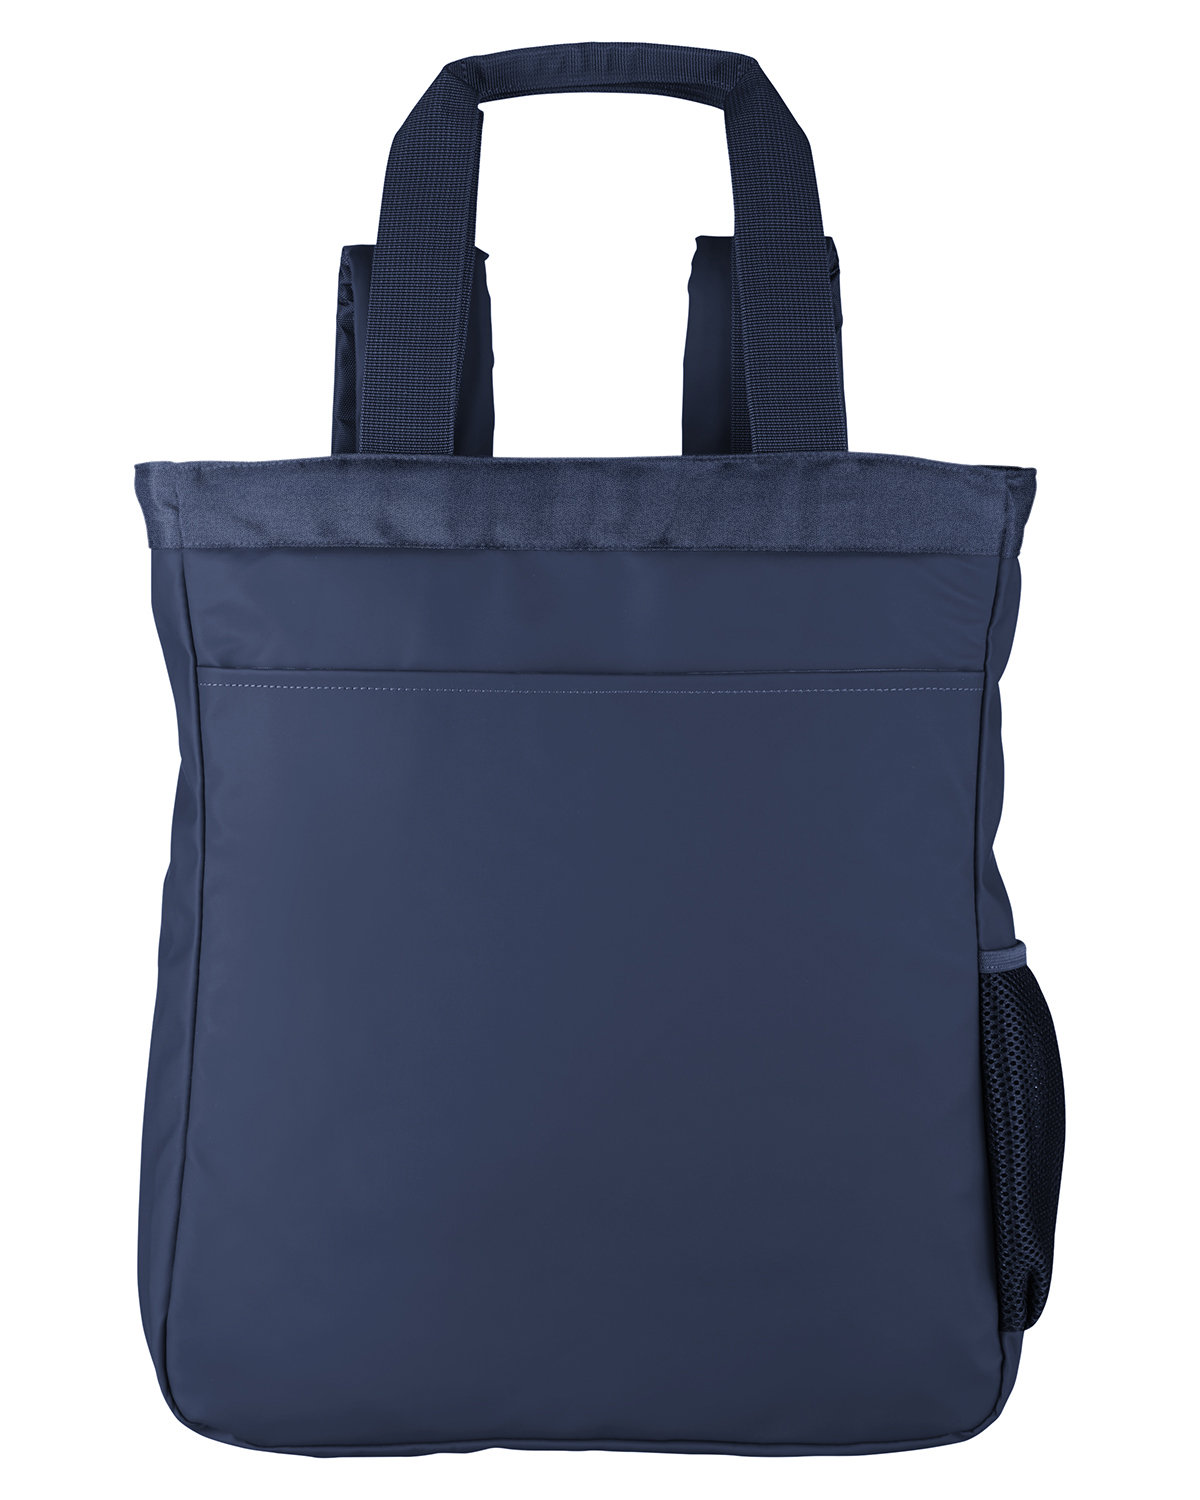 North End Convertible Backpack Tote CLASSIC NAVY 